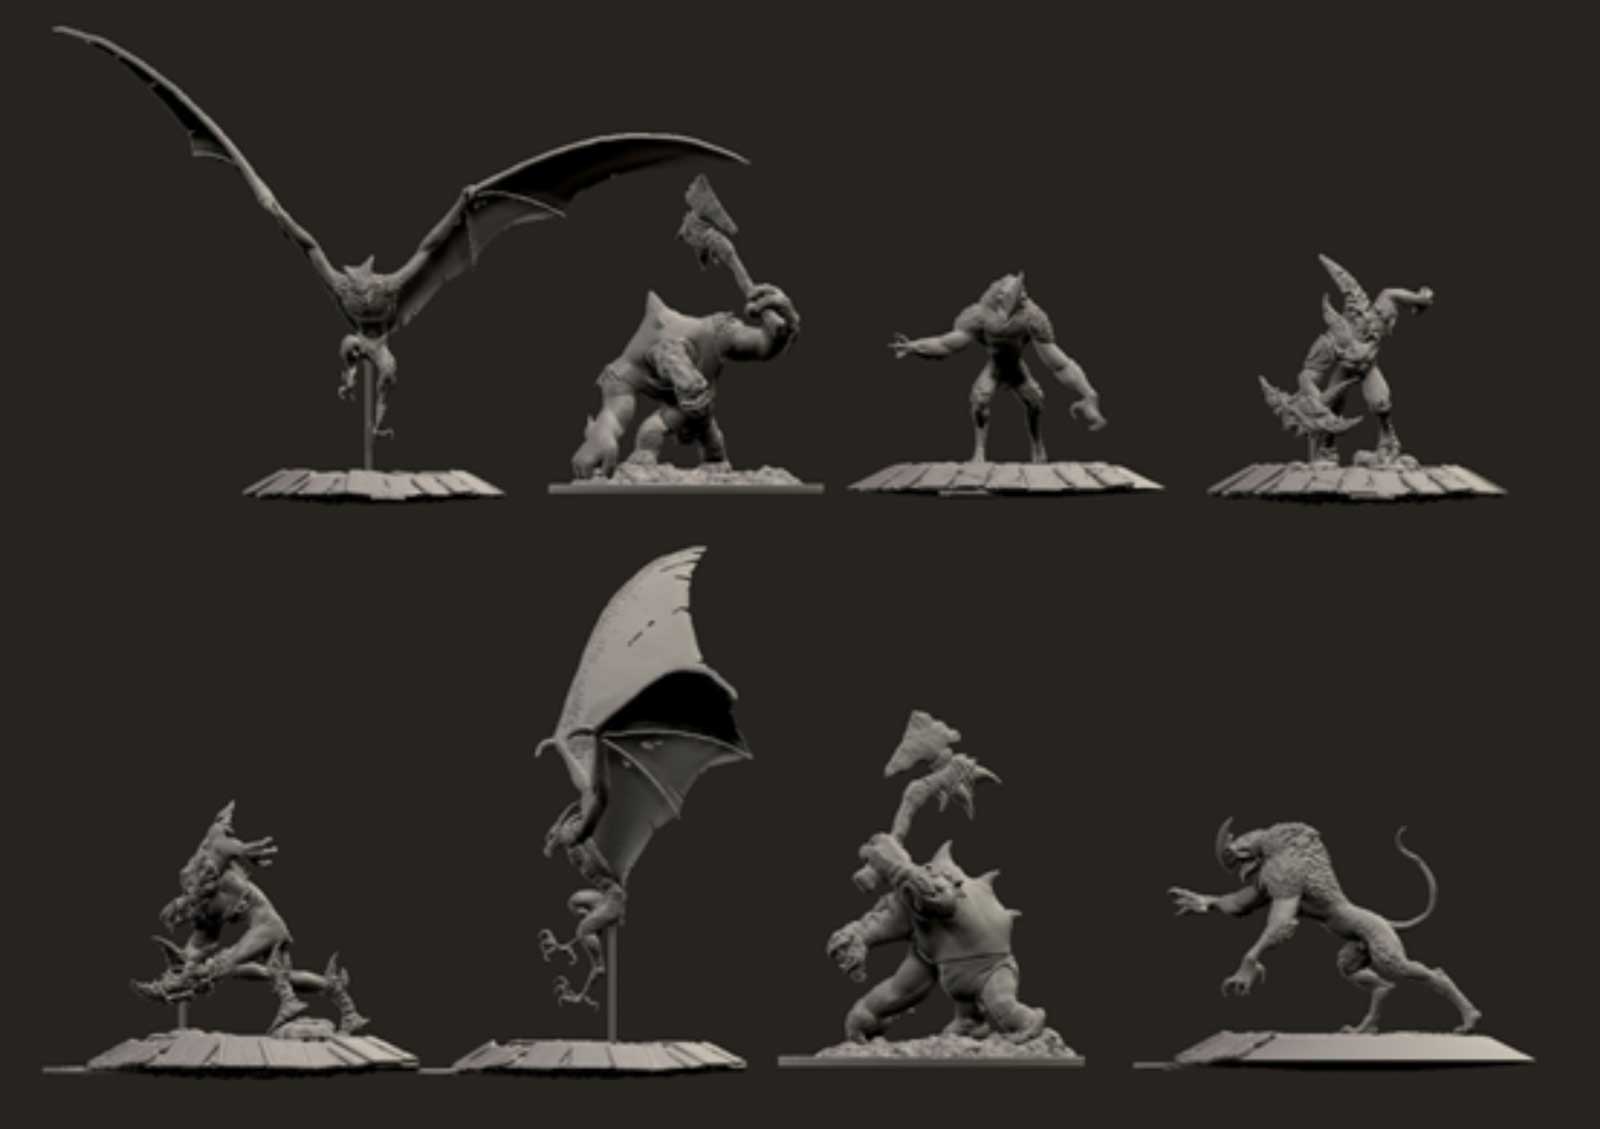 Gray 3D renders of various types of winged and ground-based monsters.